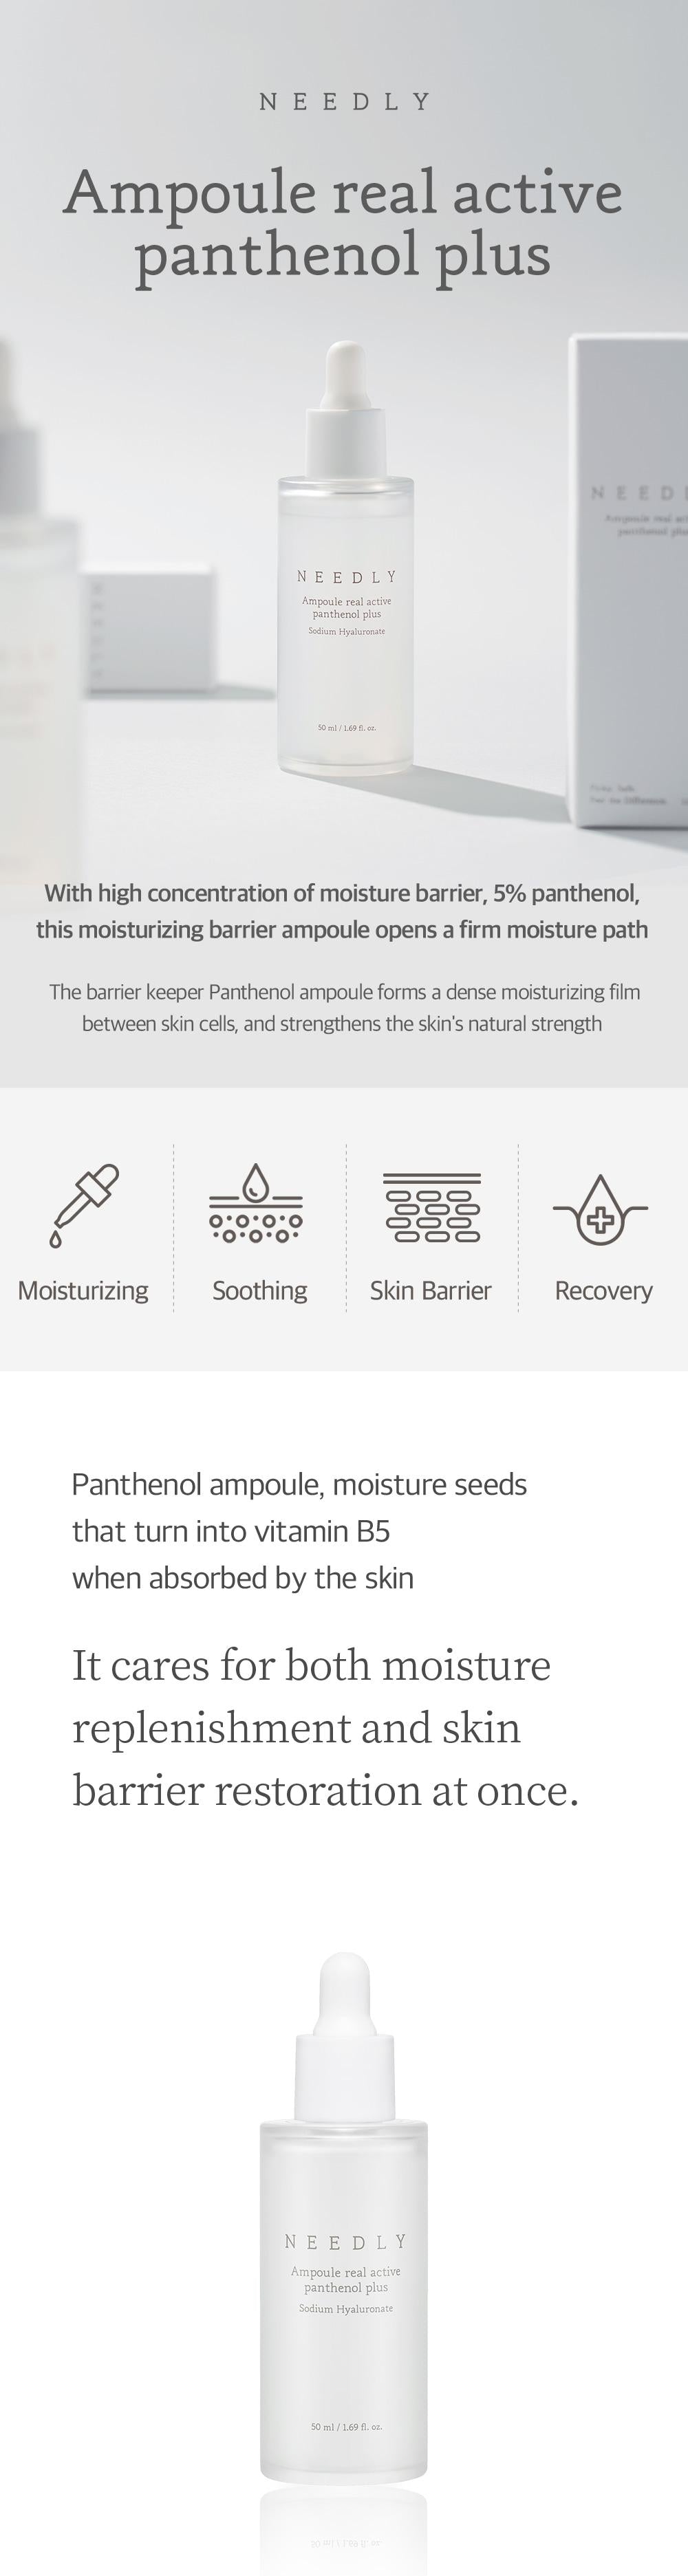 Pamphlet image of Ampoule Real Active Panthenol Plus (1)